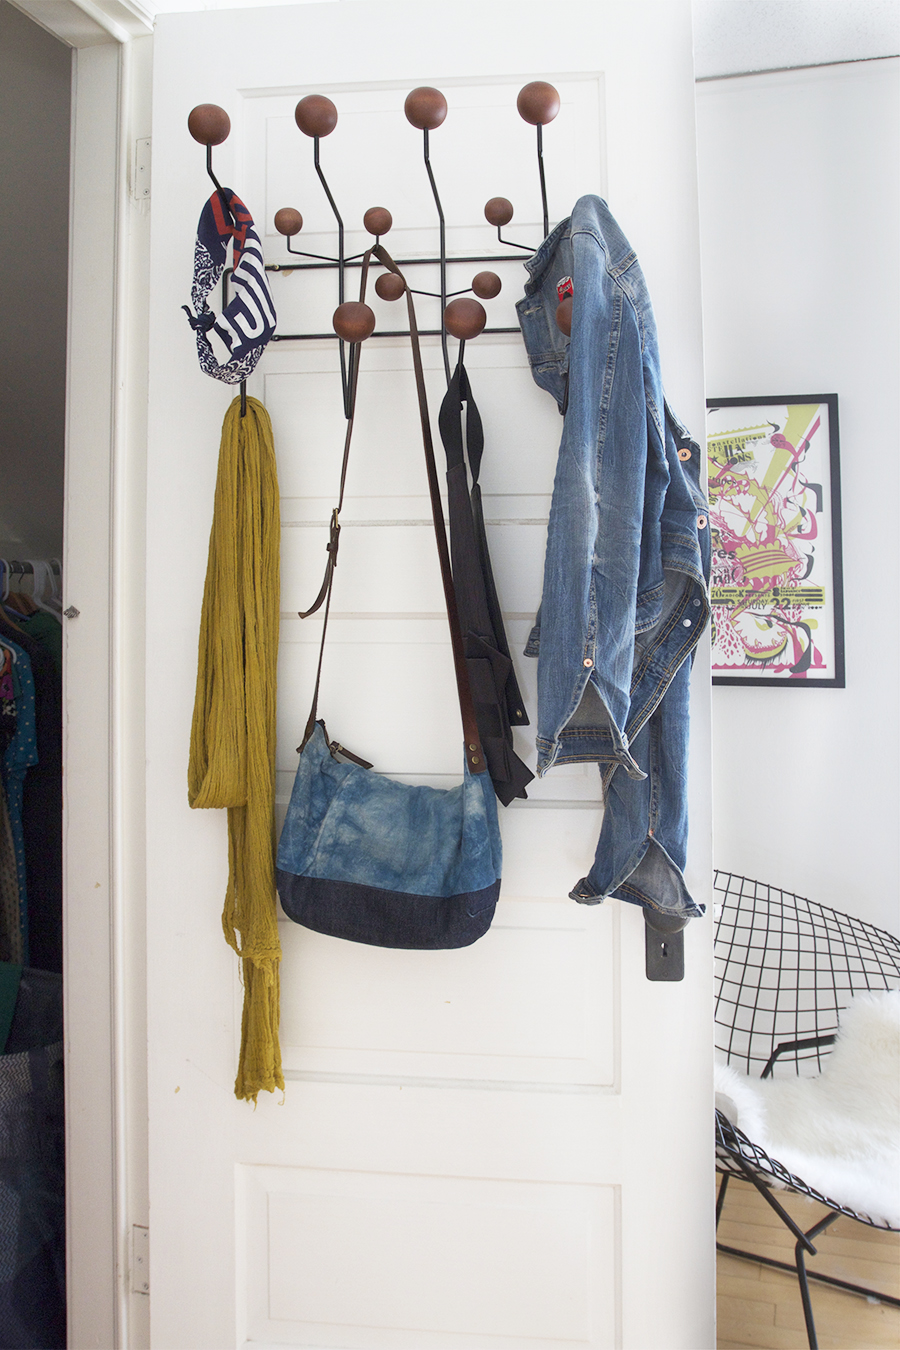 Easy Closet Clean Up, Wallpaper shelves and paint for a fresh look